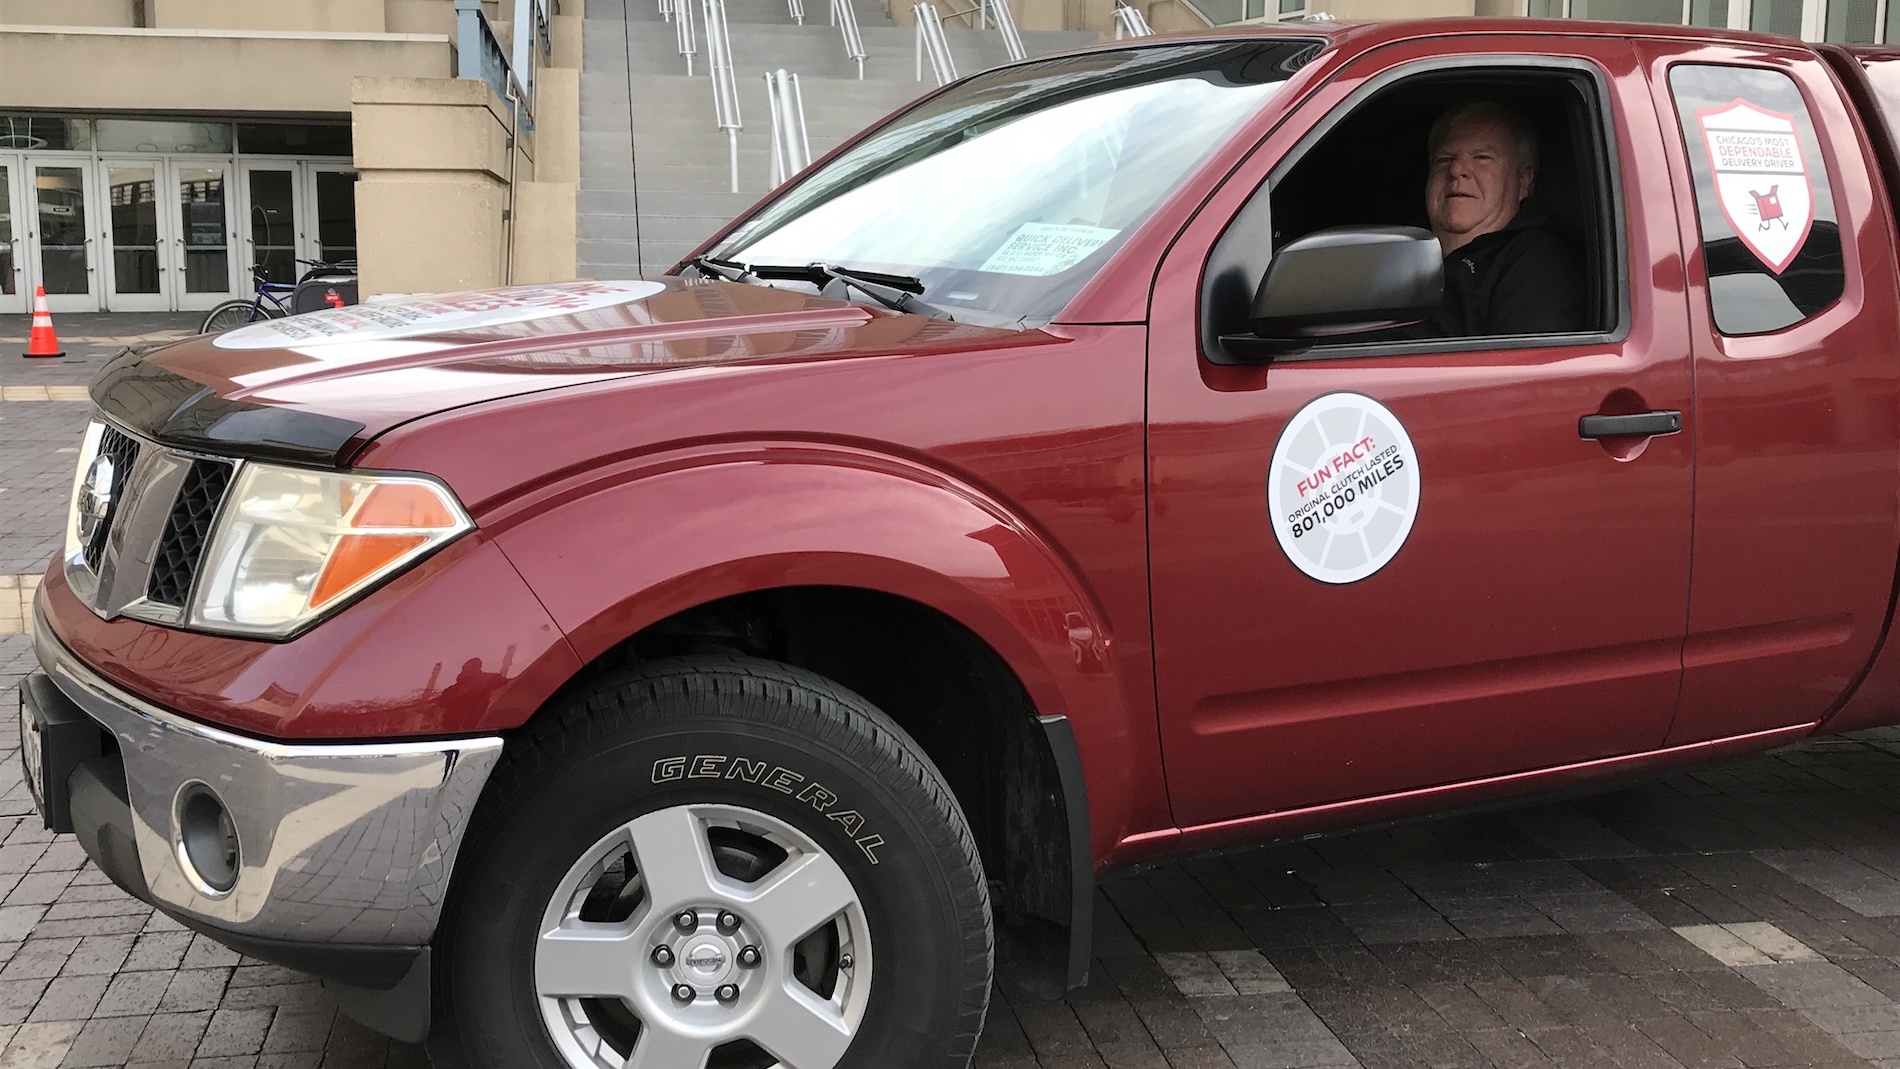 Brian Murphy and his million-mile 2007 Nissan Frontier